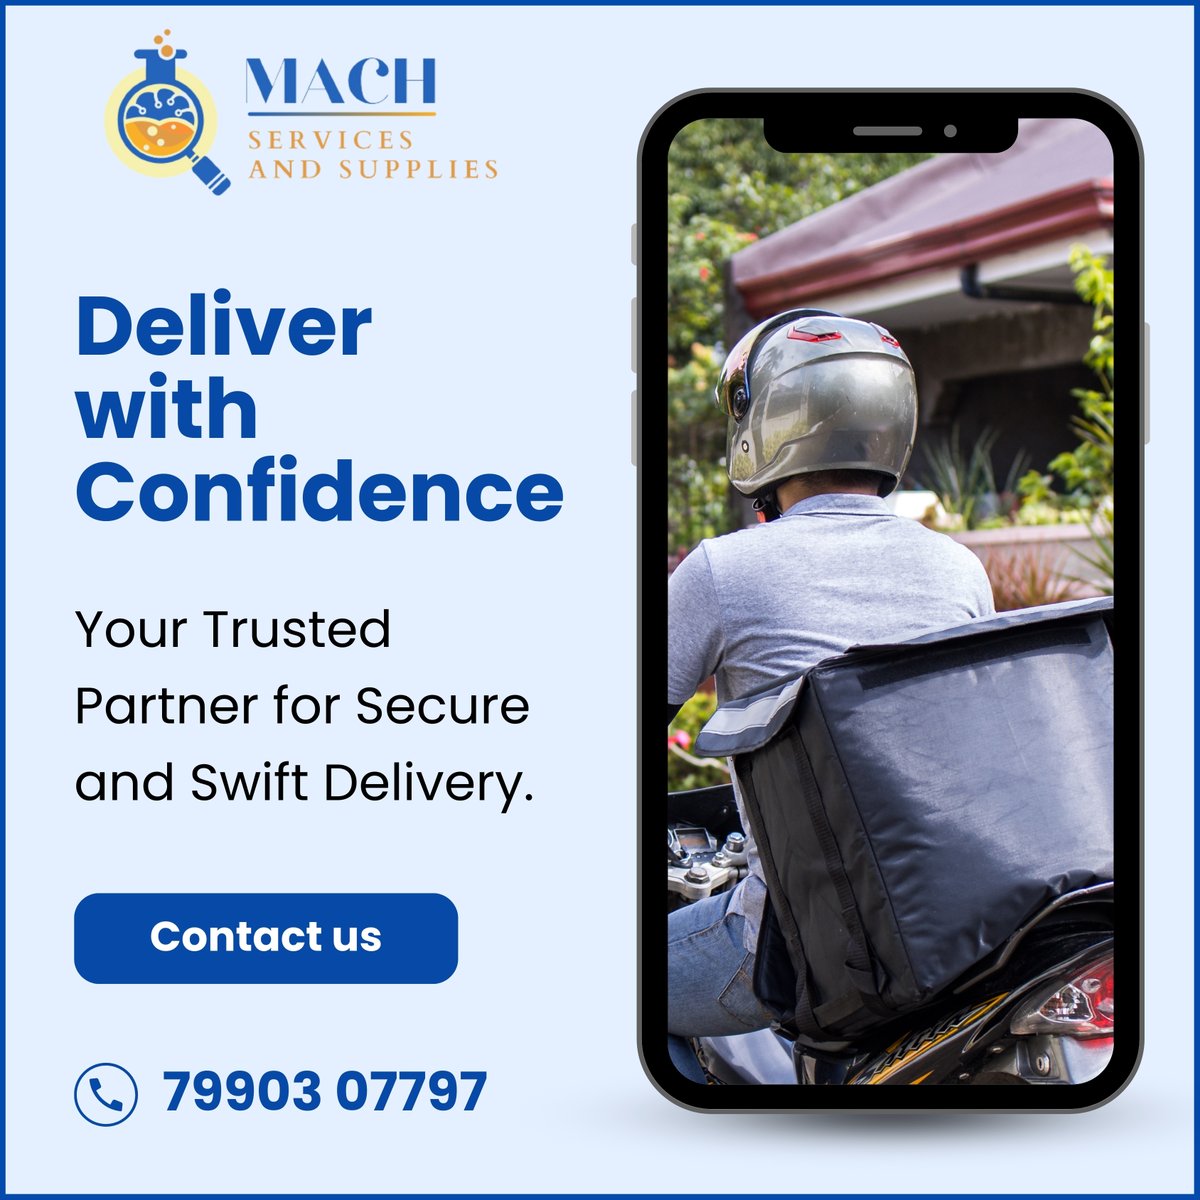 'Swift Solutions for Busy Lives: Count on Us for Speedy Delivery Anytime.'
.
.
#delivery #machservicesandsupplies #machservices #deliveryservice #style #love #instagood #like #photography #motivation #motivationalquotes #inspiration #surat #suratcity #suratfood #suratphotoclub